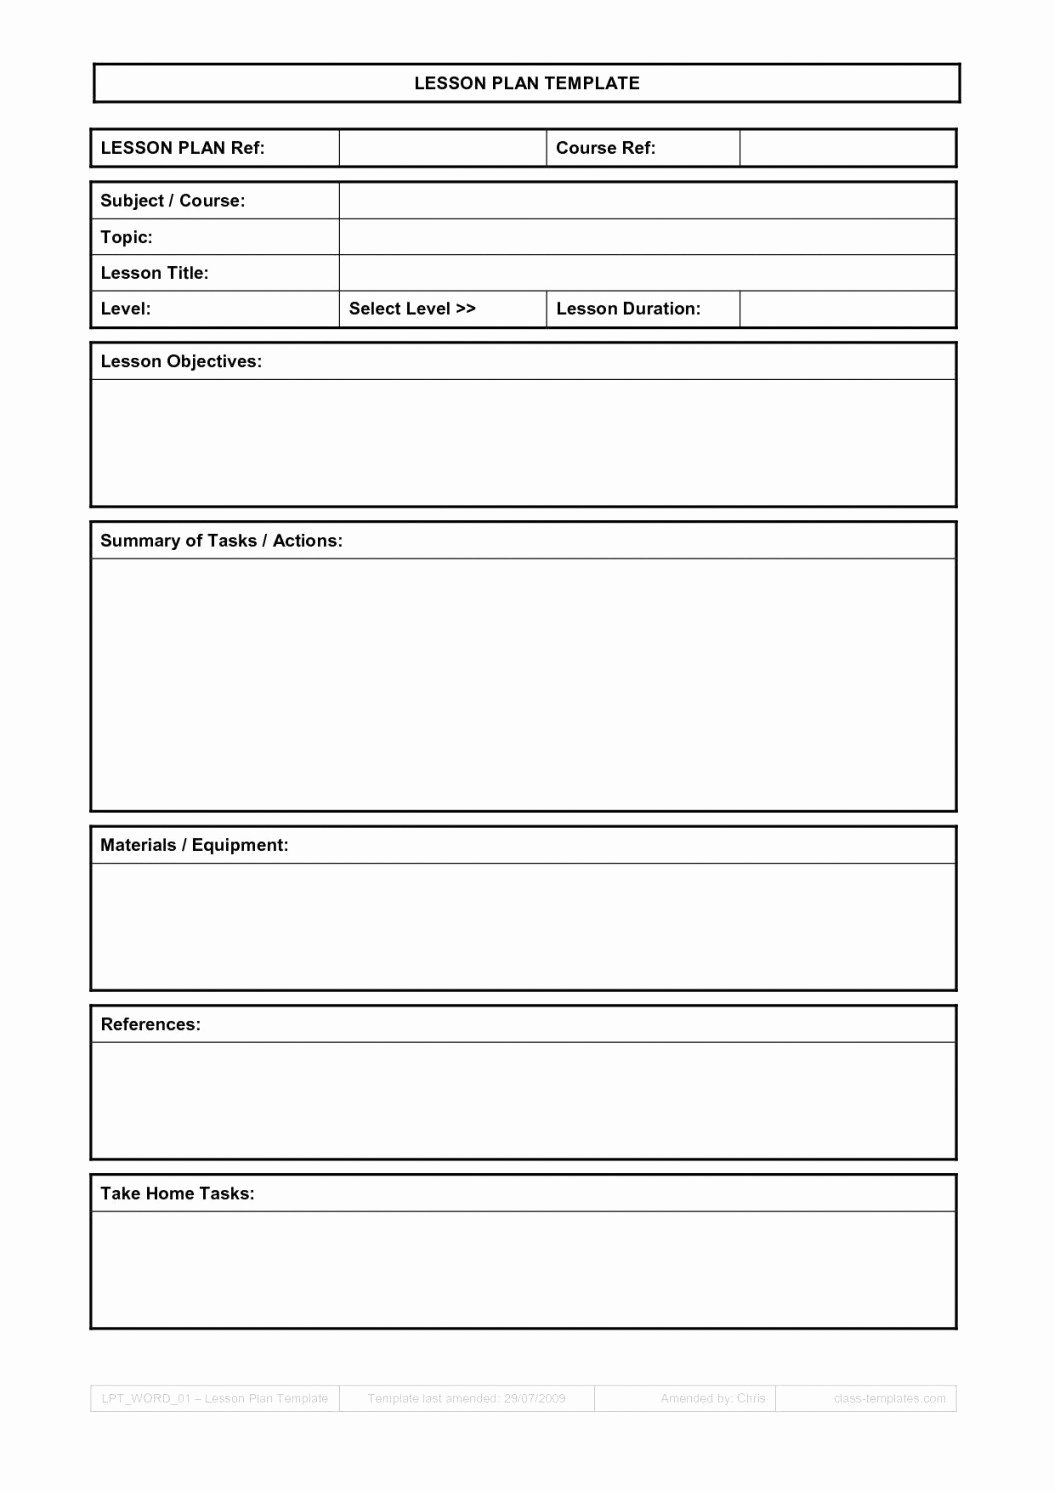 Elementary Music Lesson Plan Template Beautiful General Music Lesson Plan Template – Elementary General